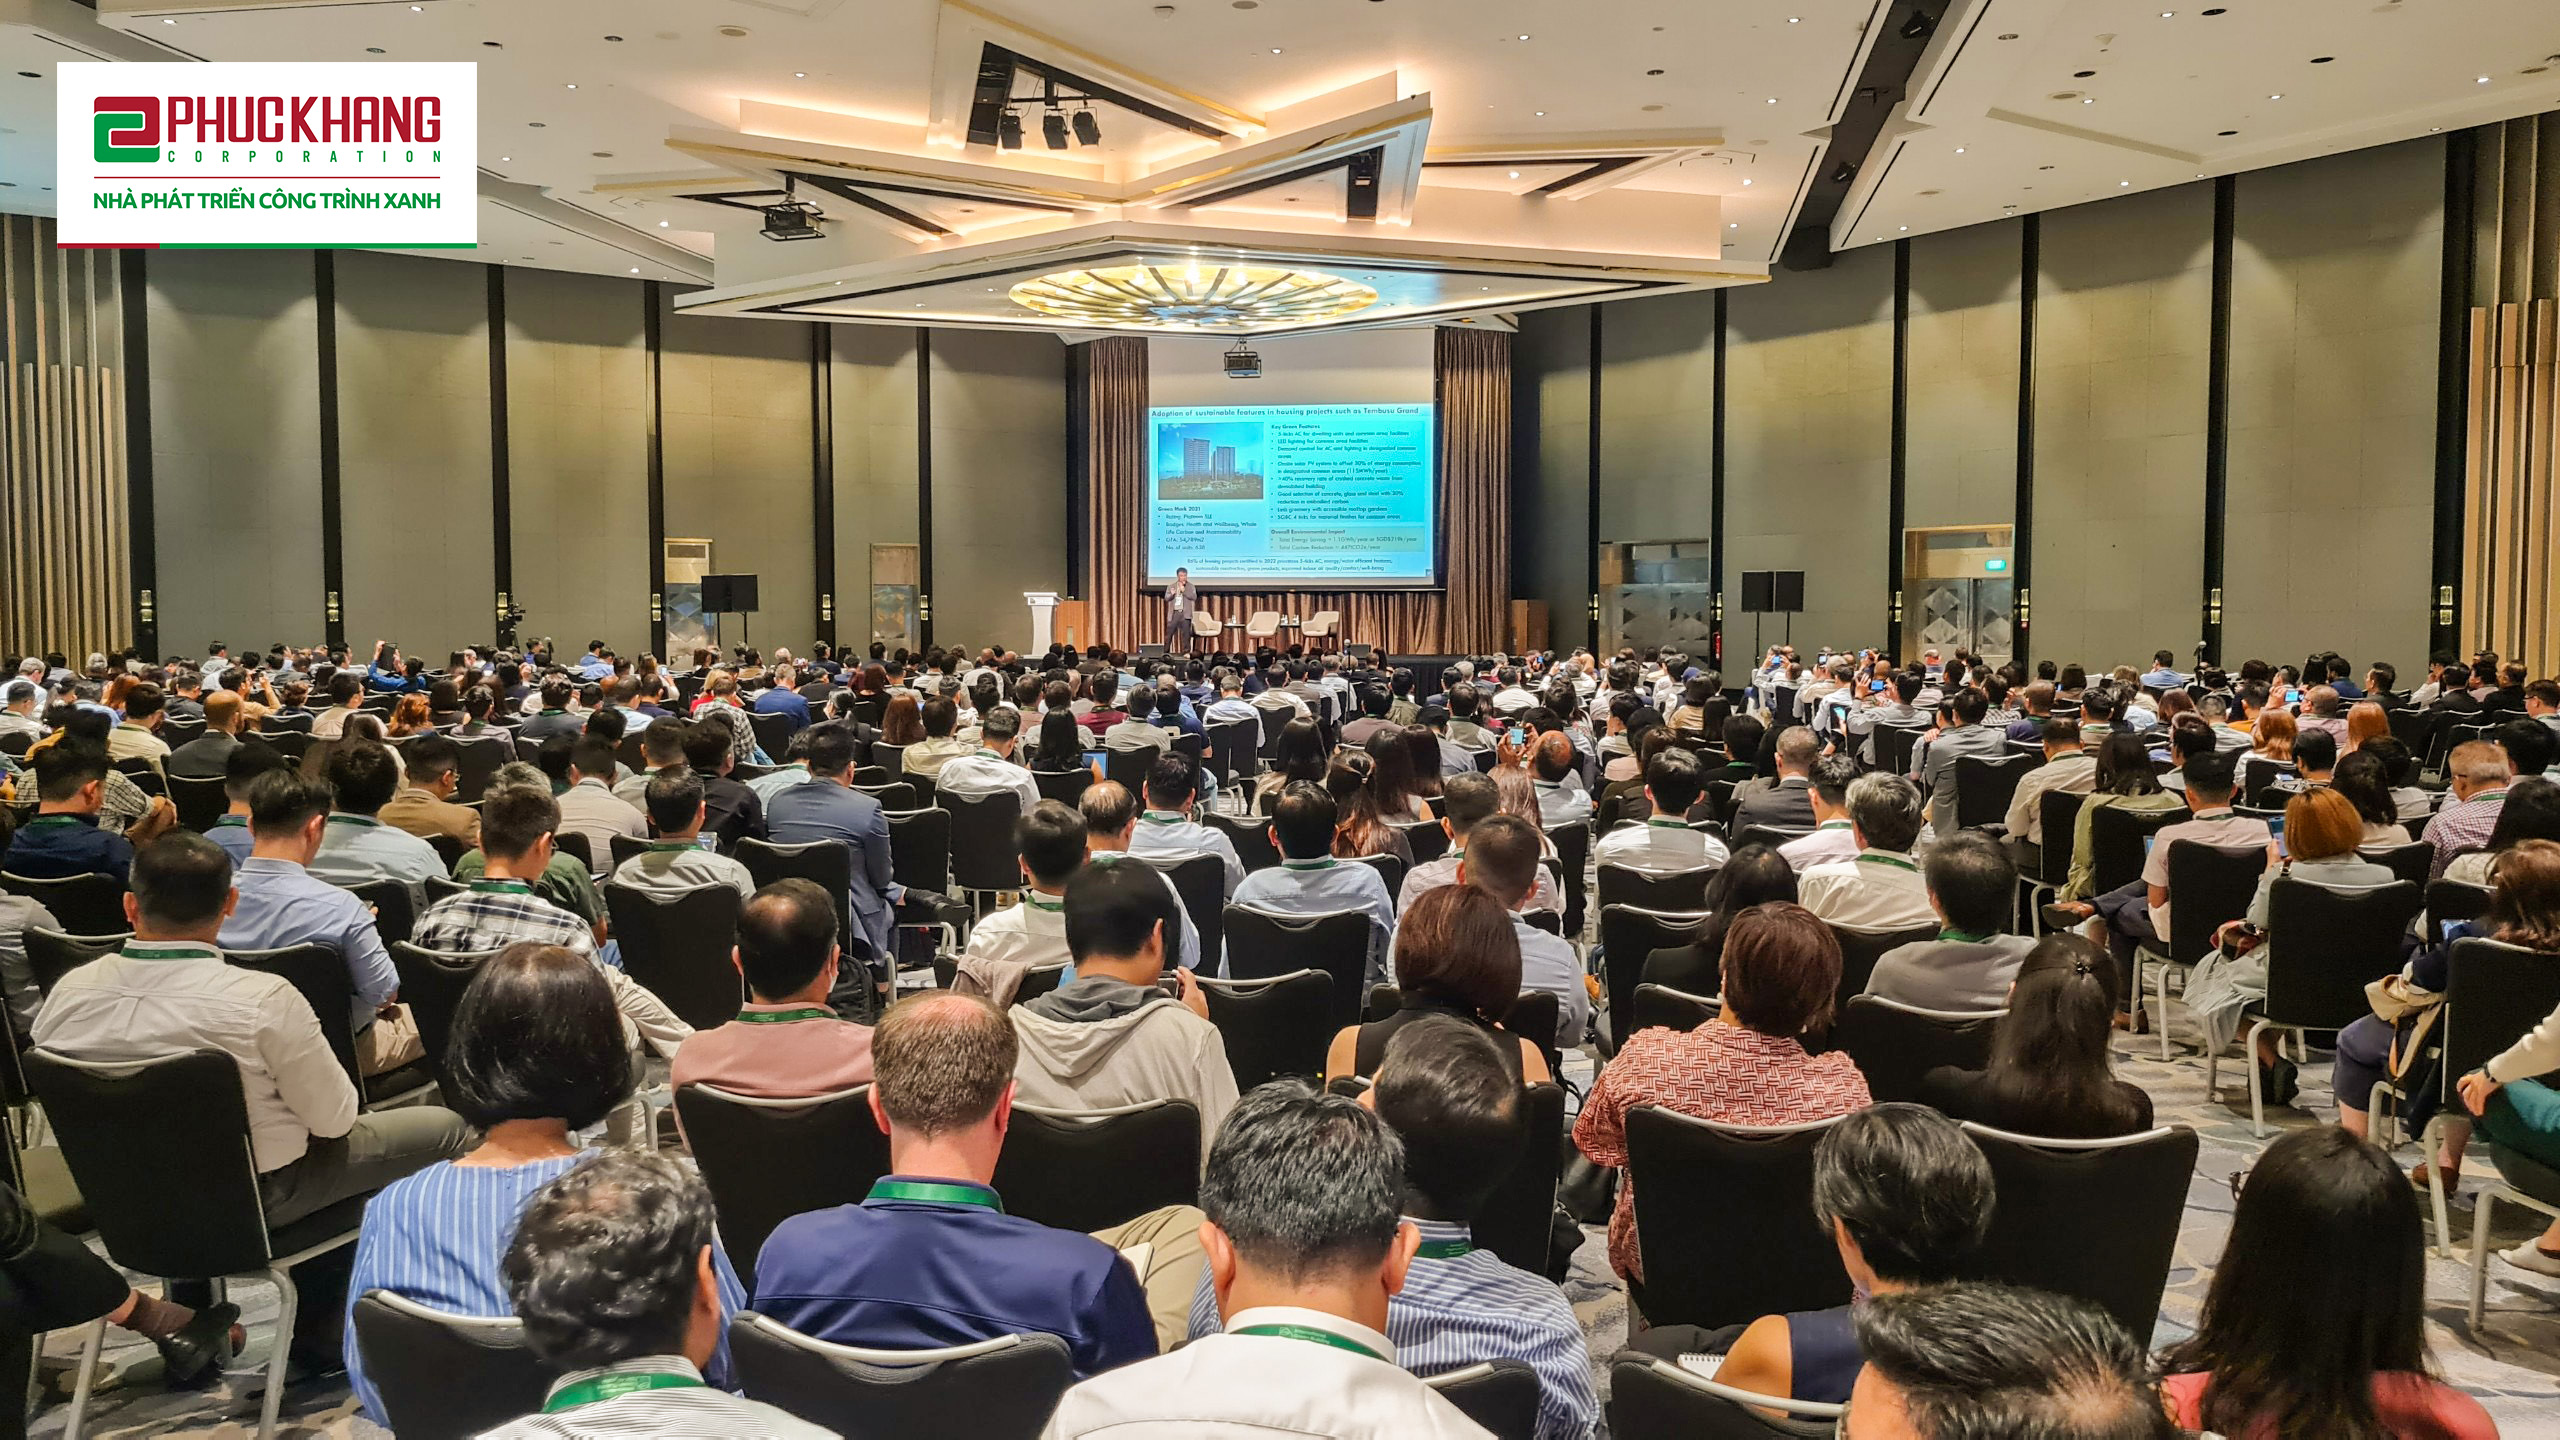 The International Green Building Conference 2023 attracted the participation of leading experts, leaders, and policymakers in green building development.